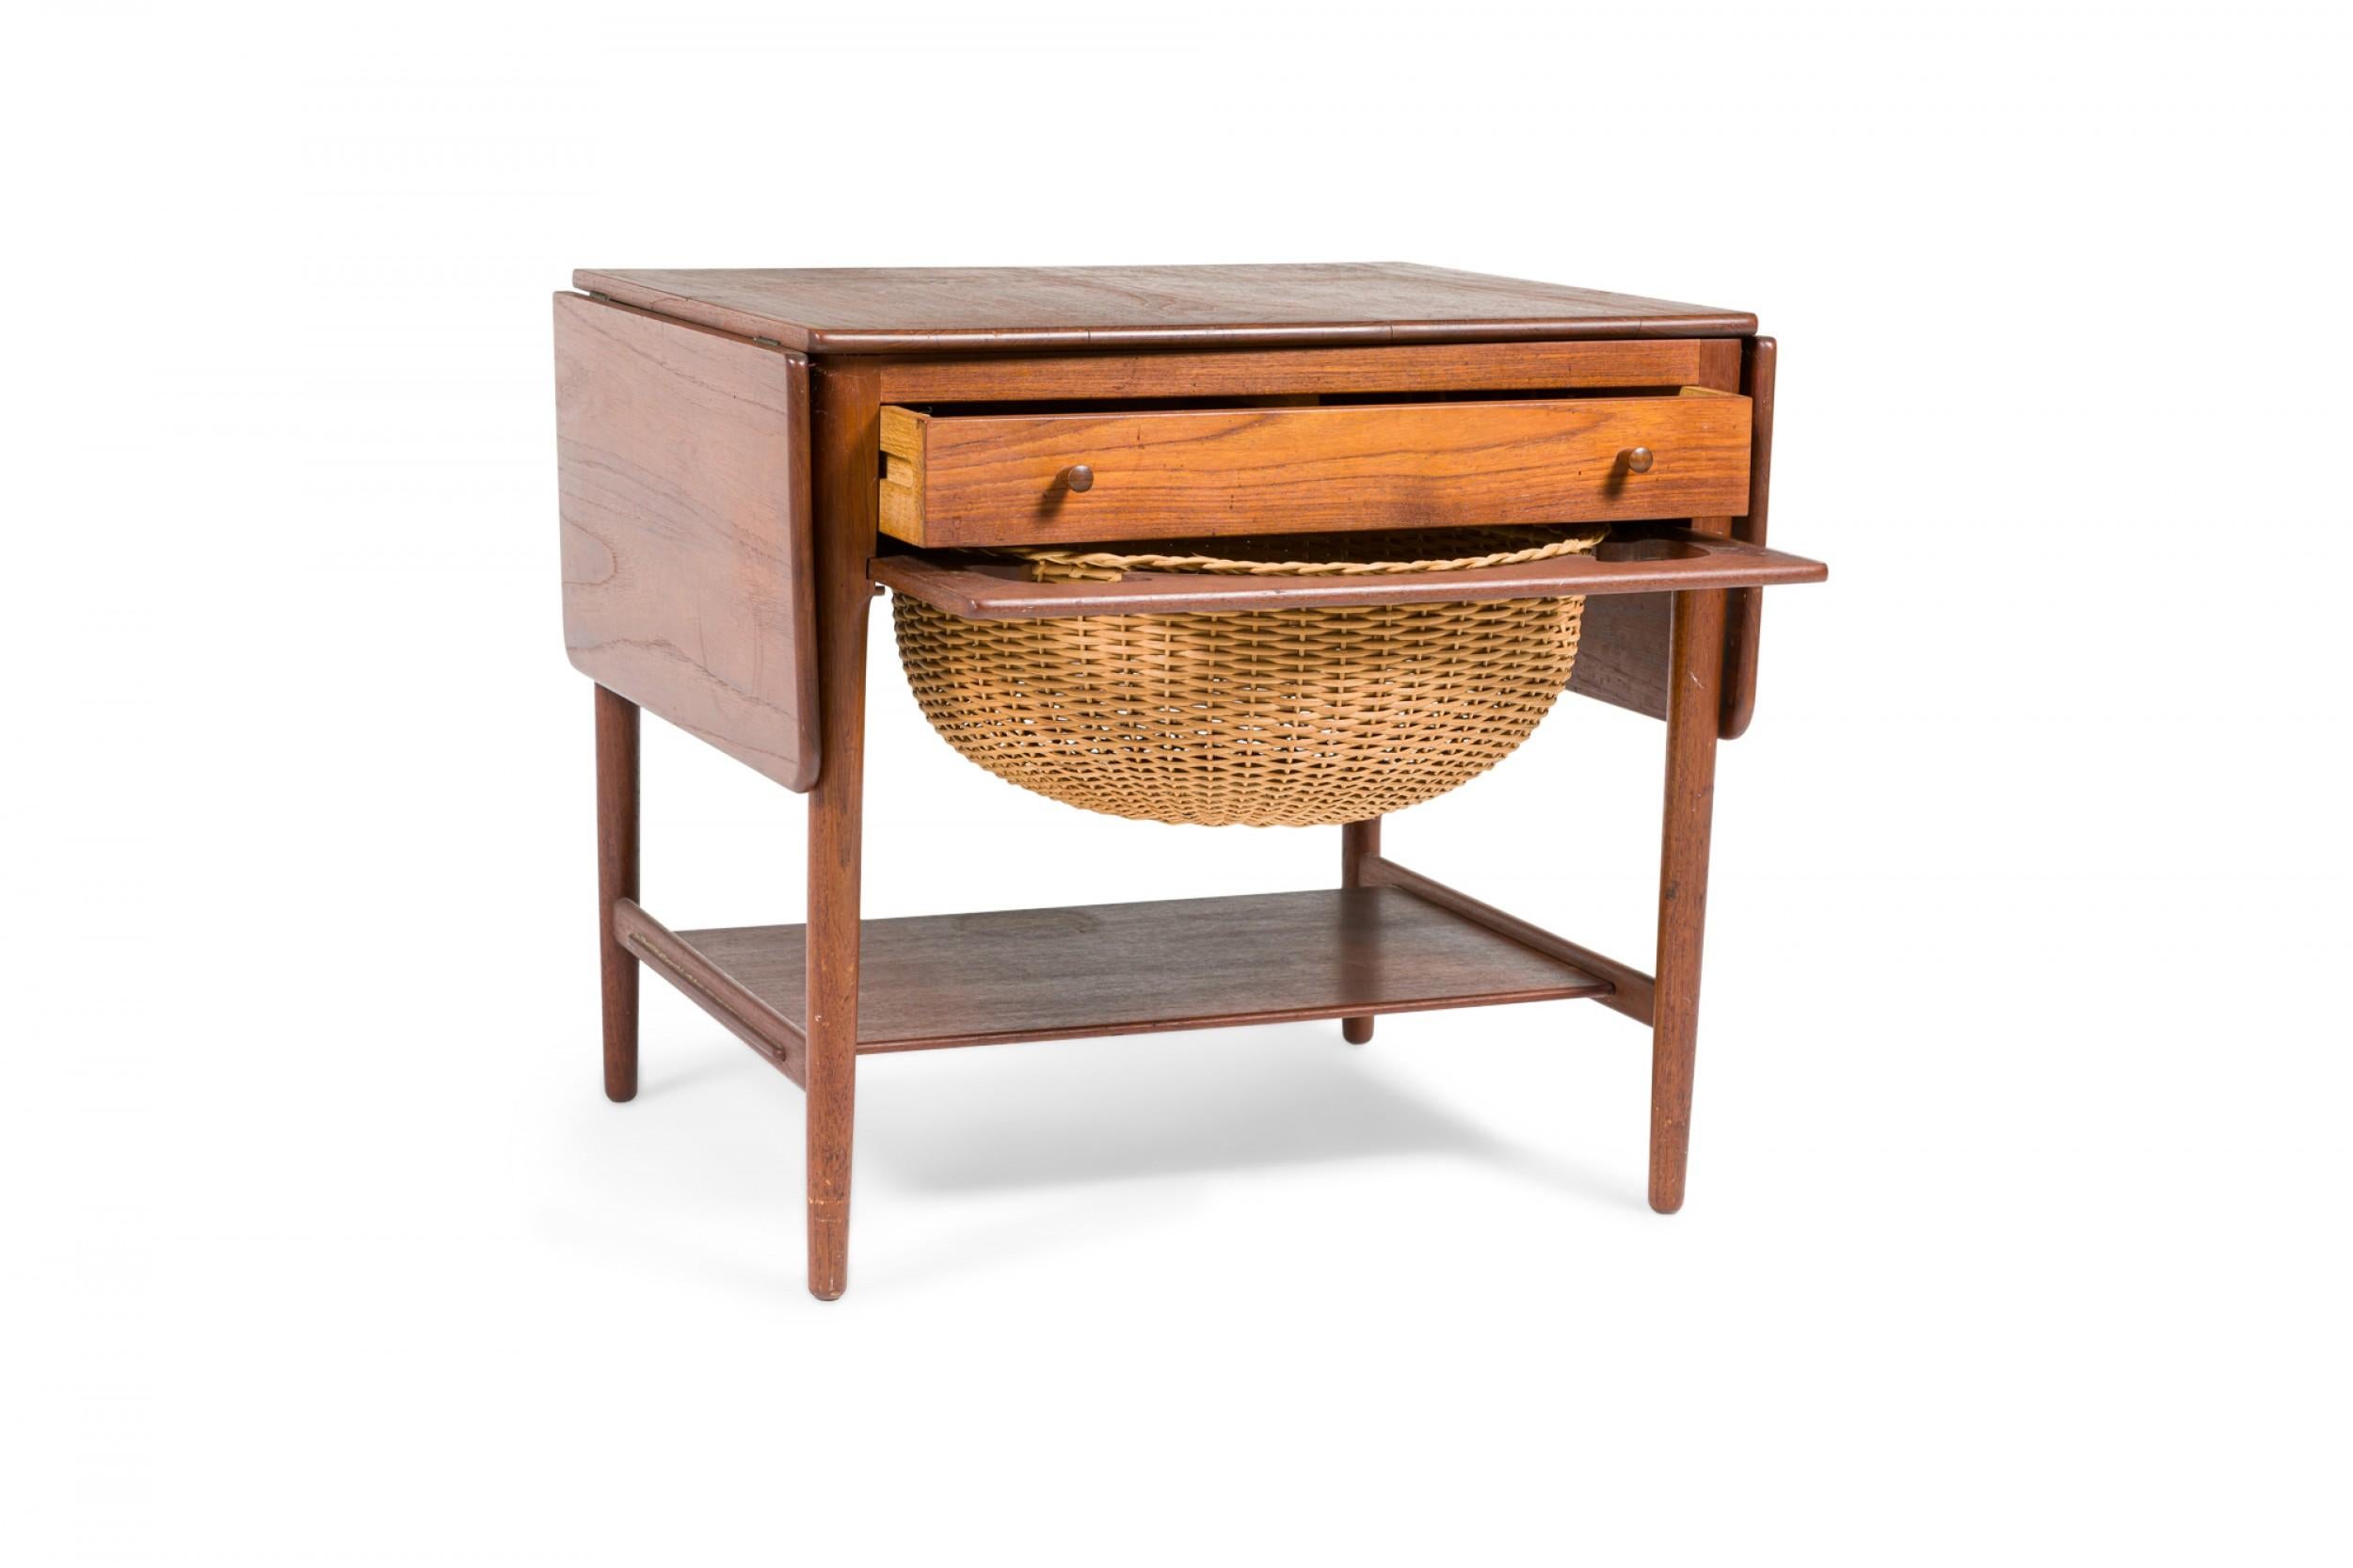 Danish Mid-Century teak drop leaf sewing table with a single drawer with two wooden drawer pulls and a wicker basket compartment mounted below the tabletop and above a lower stretcher shelf. (HANS WEGNER FOR ANDREAS TUCK)
